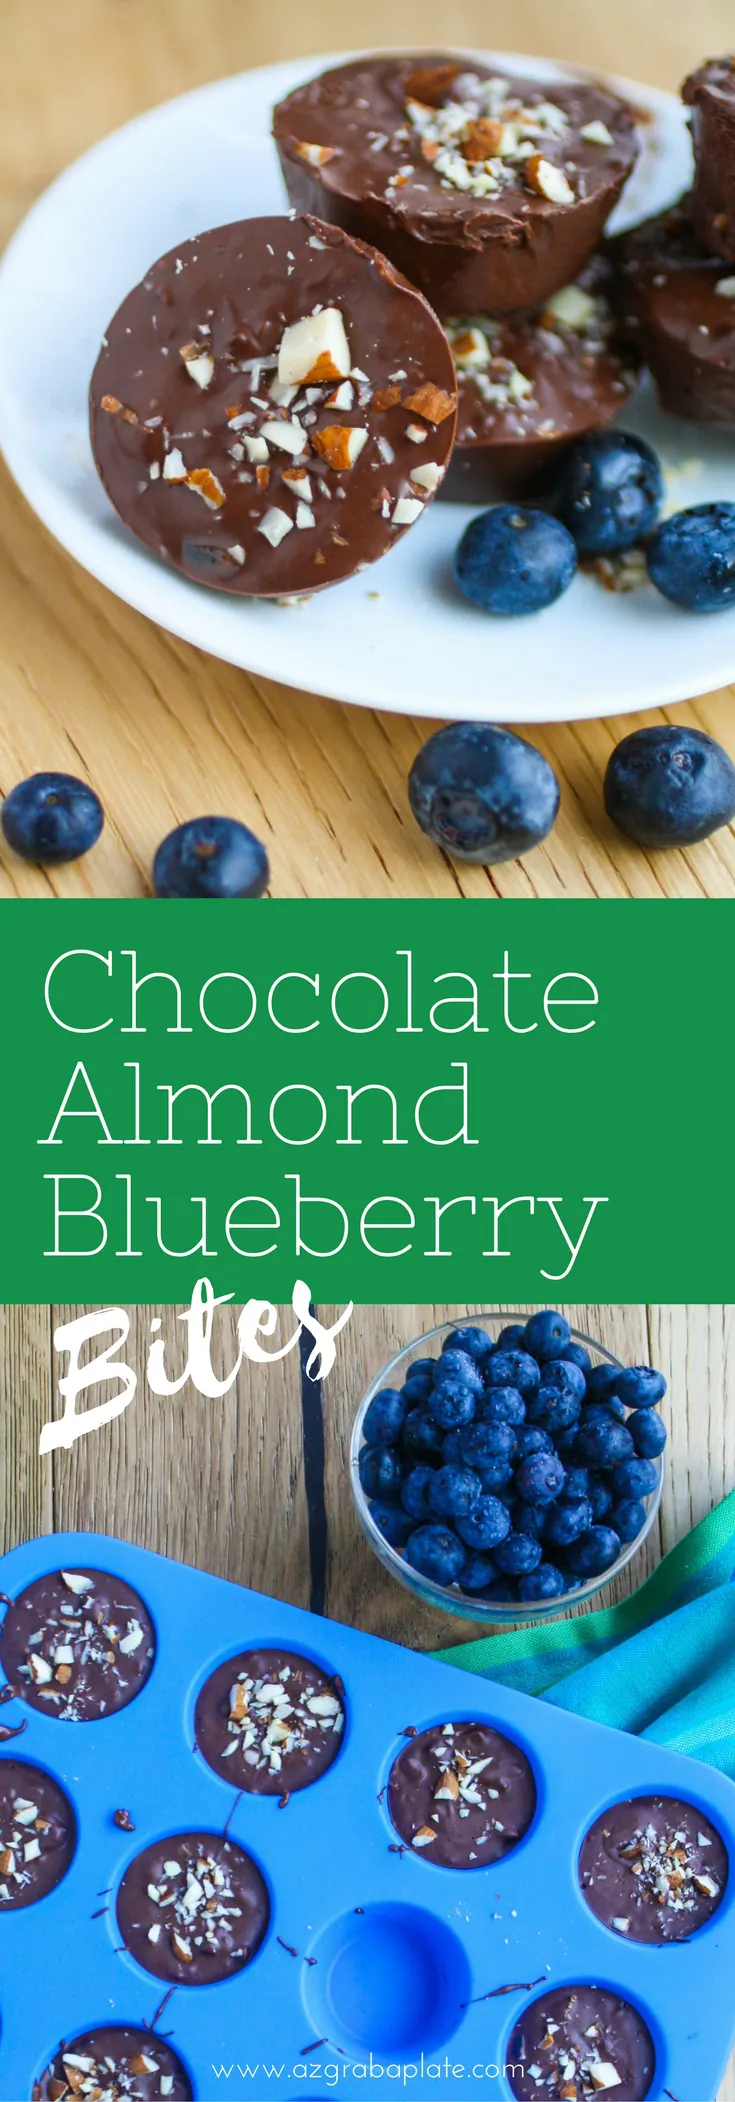 Chocolate Almond Blueberry Bites are a fun treat. These easy-to-make candies will satisfy your sweet tooth!